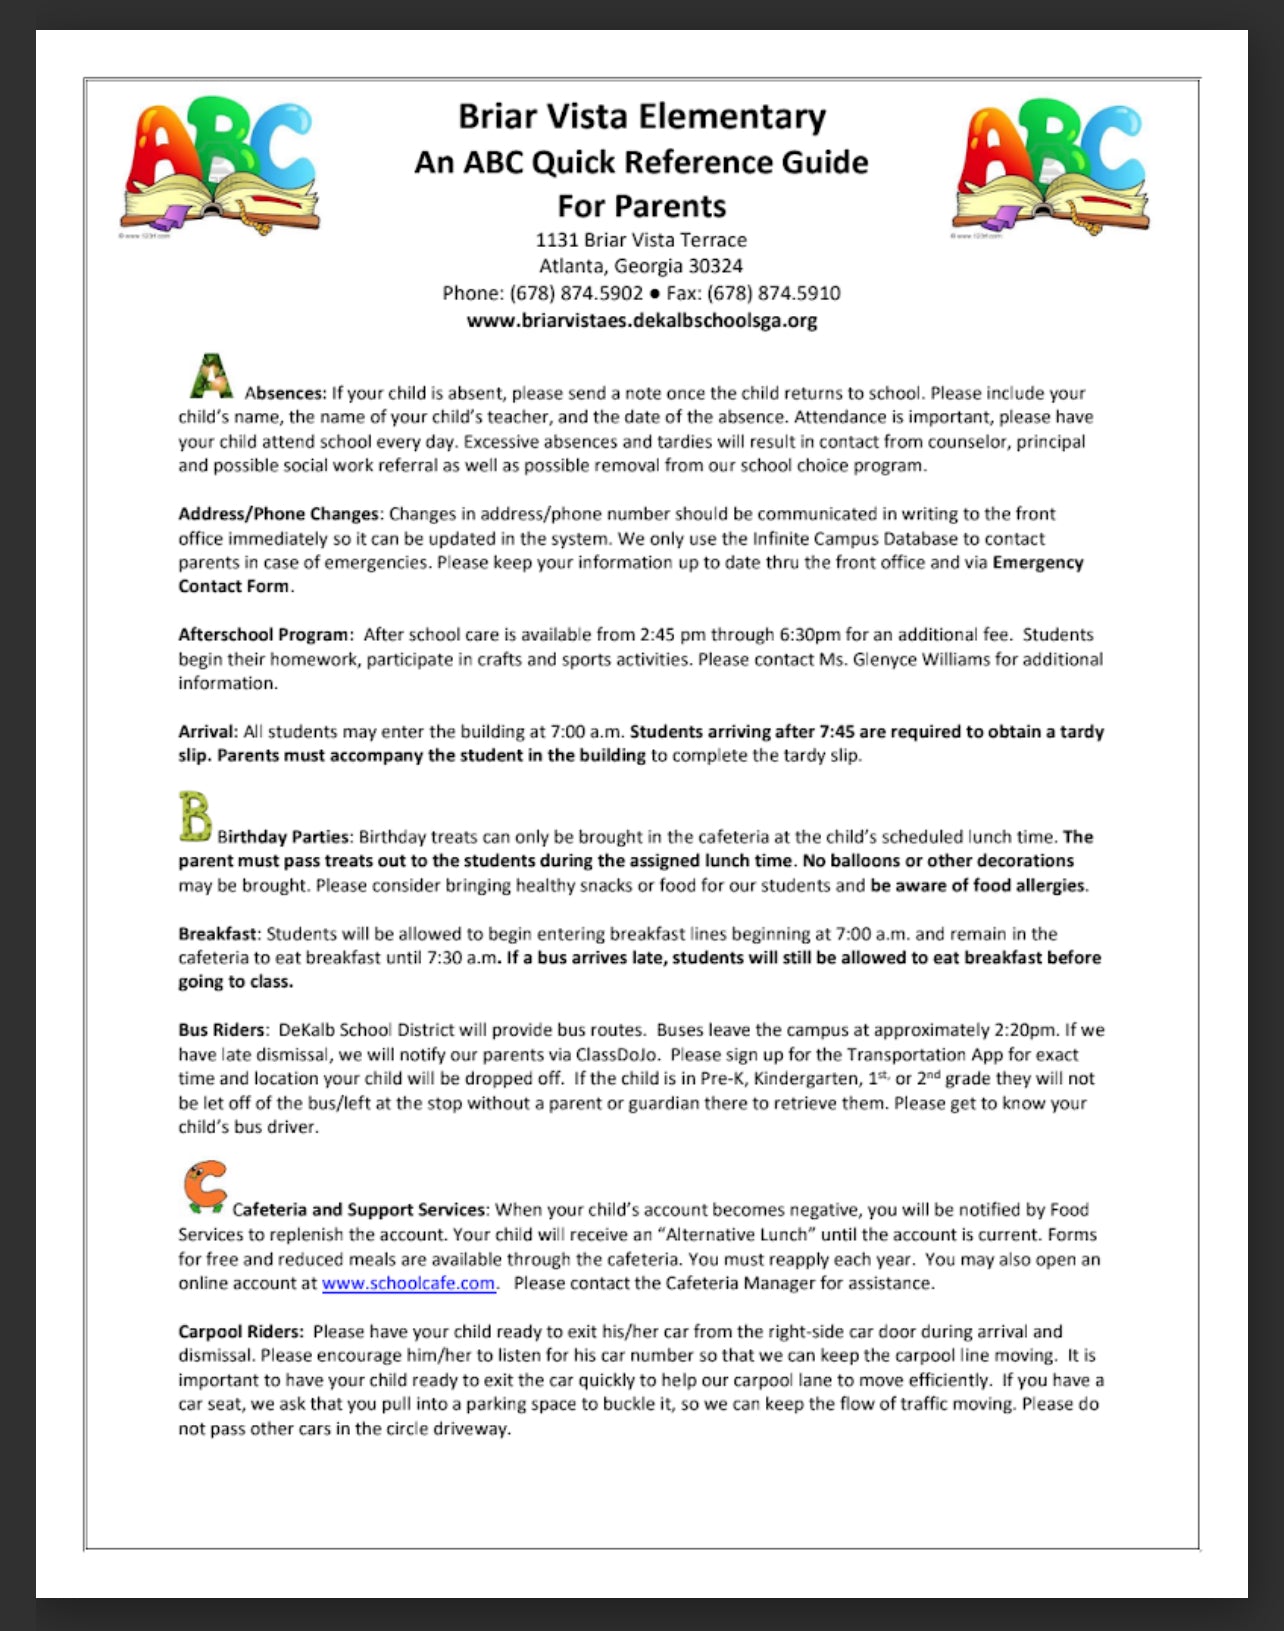 Briar Vista Elementary An ABC Quick Reference Guide for Parents